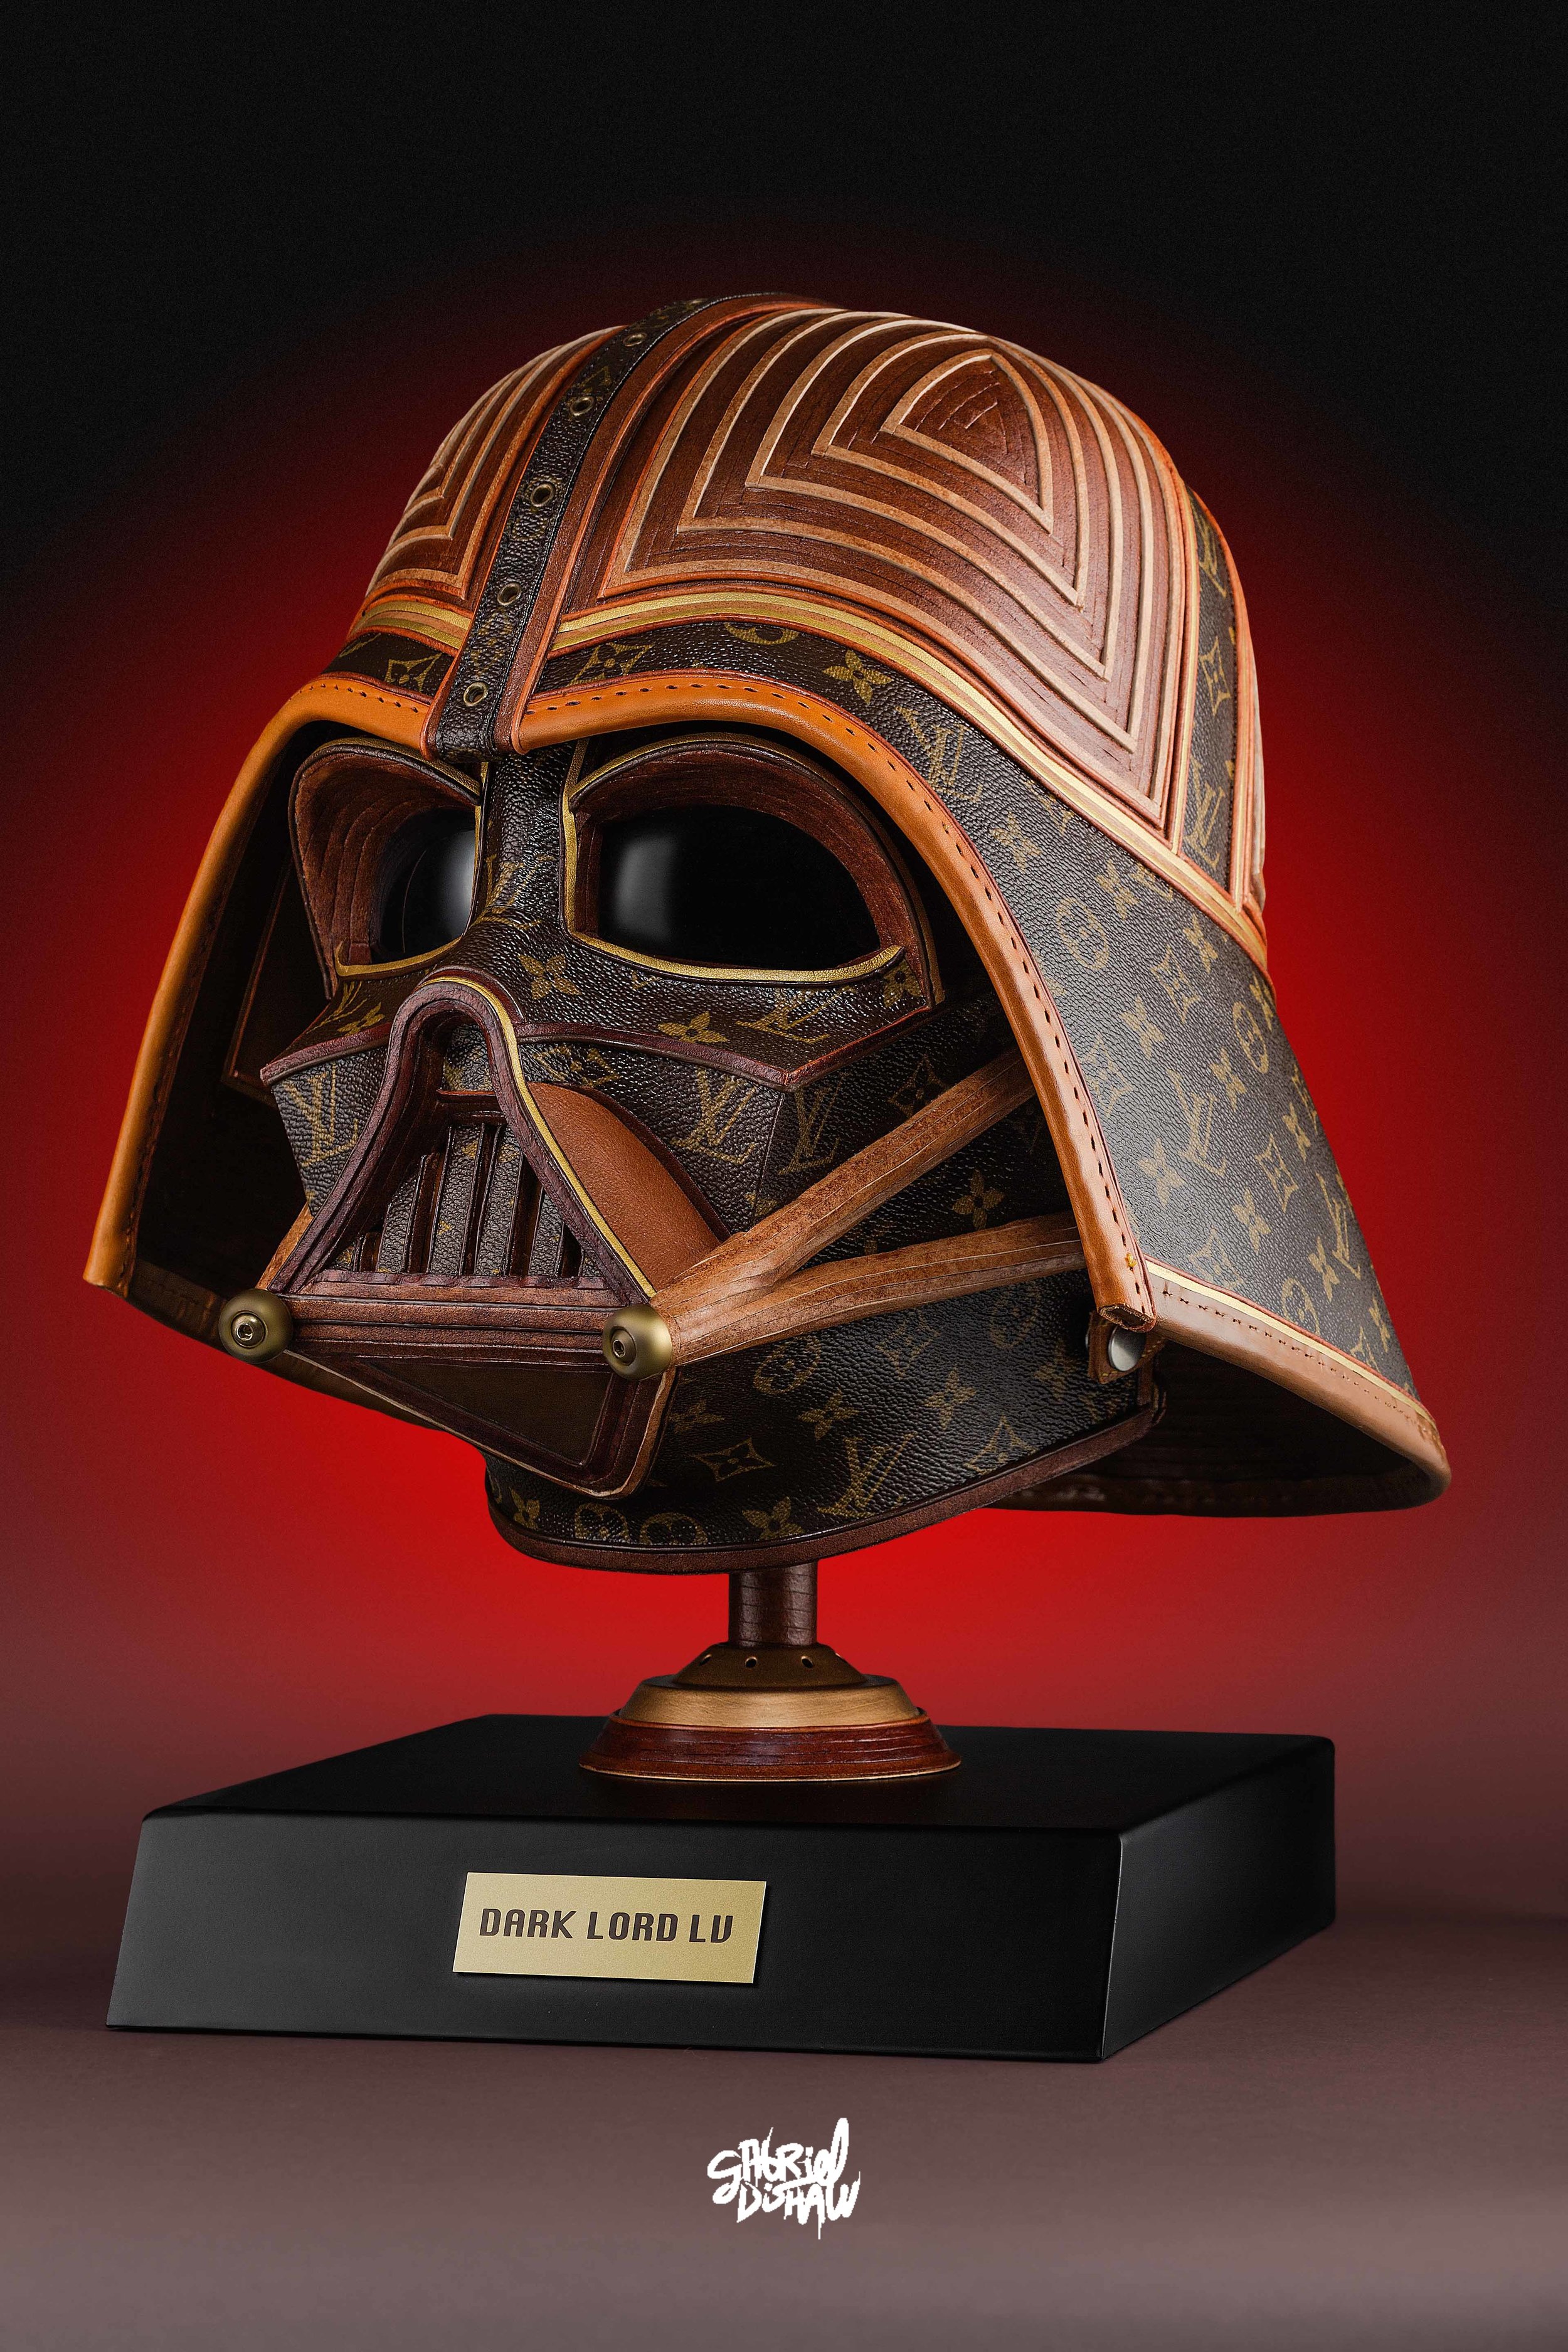 These Louis Vuitton 'Star Wars' Helmets Are A Work Of Art